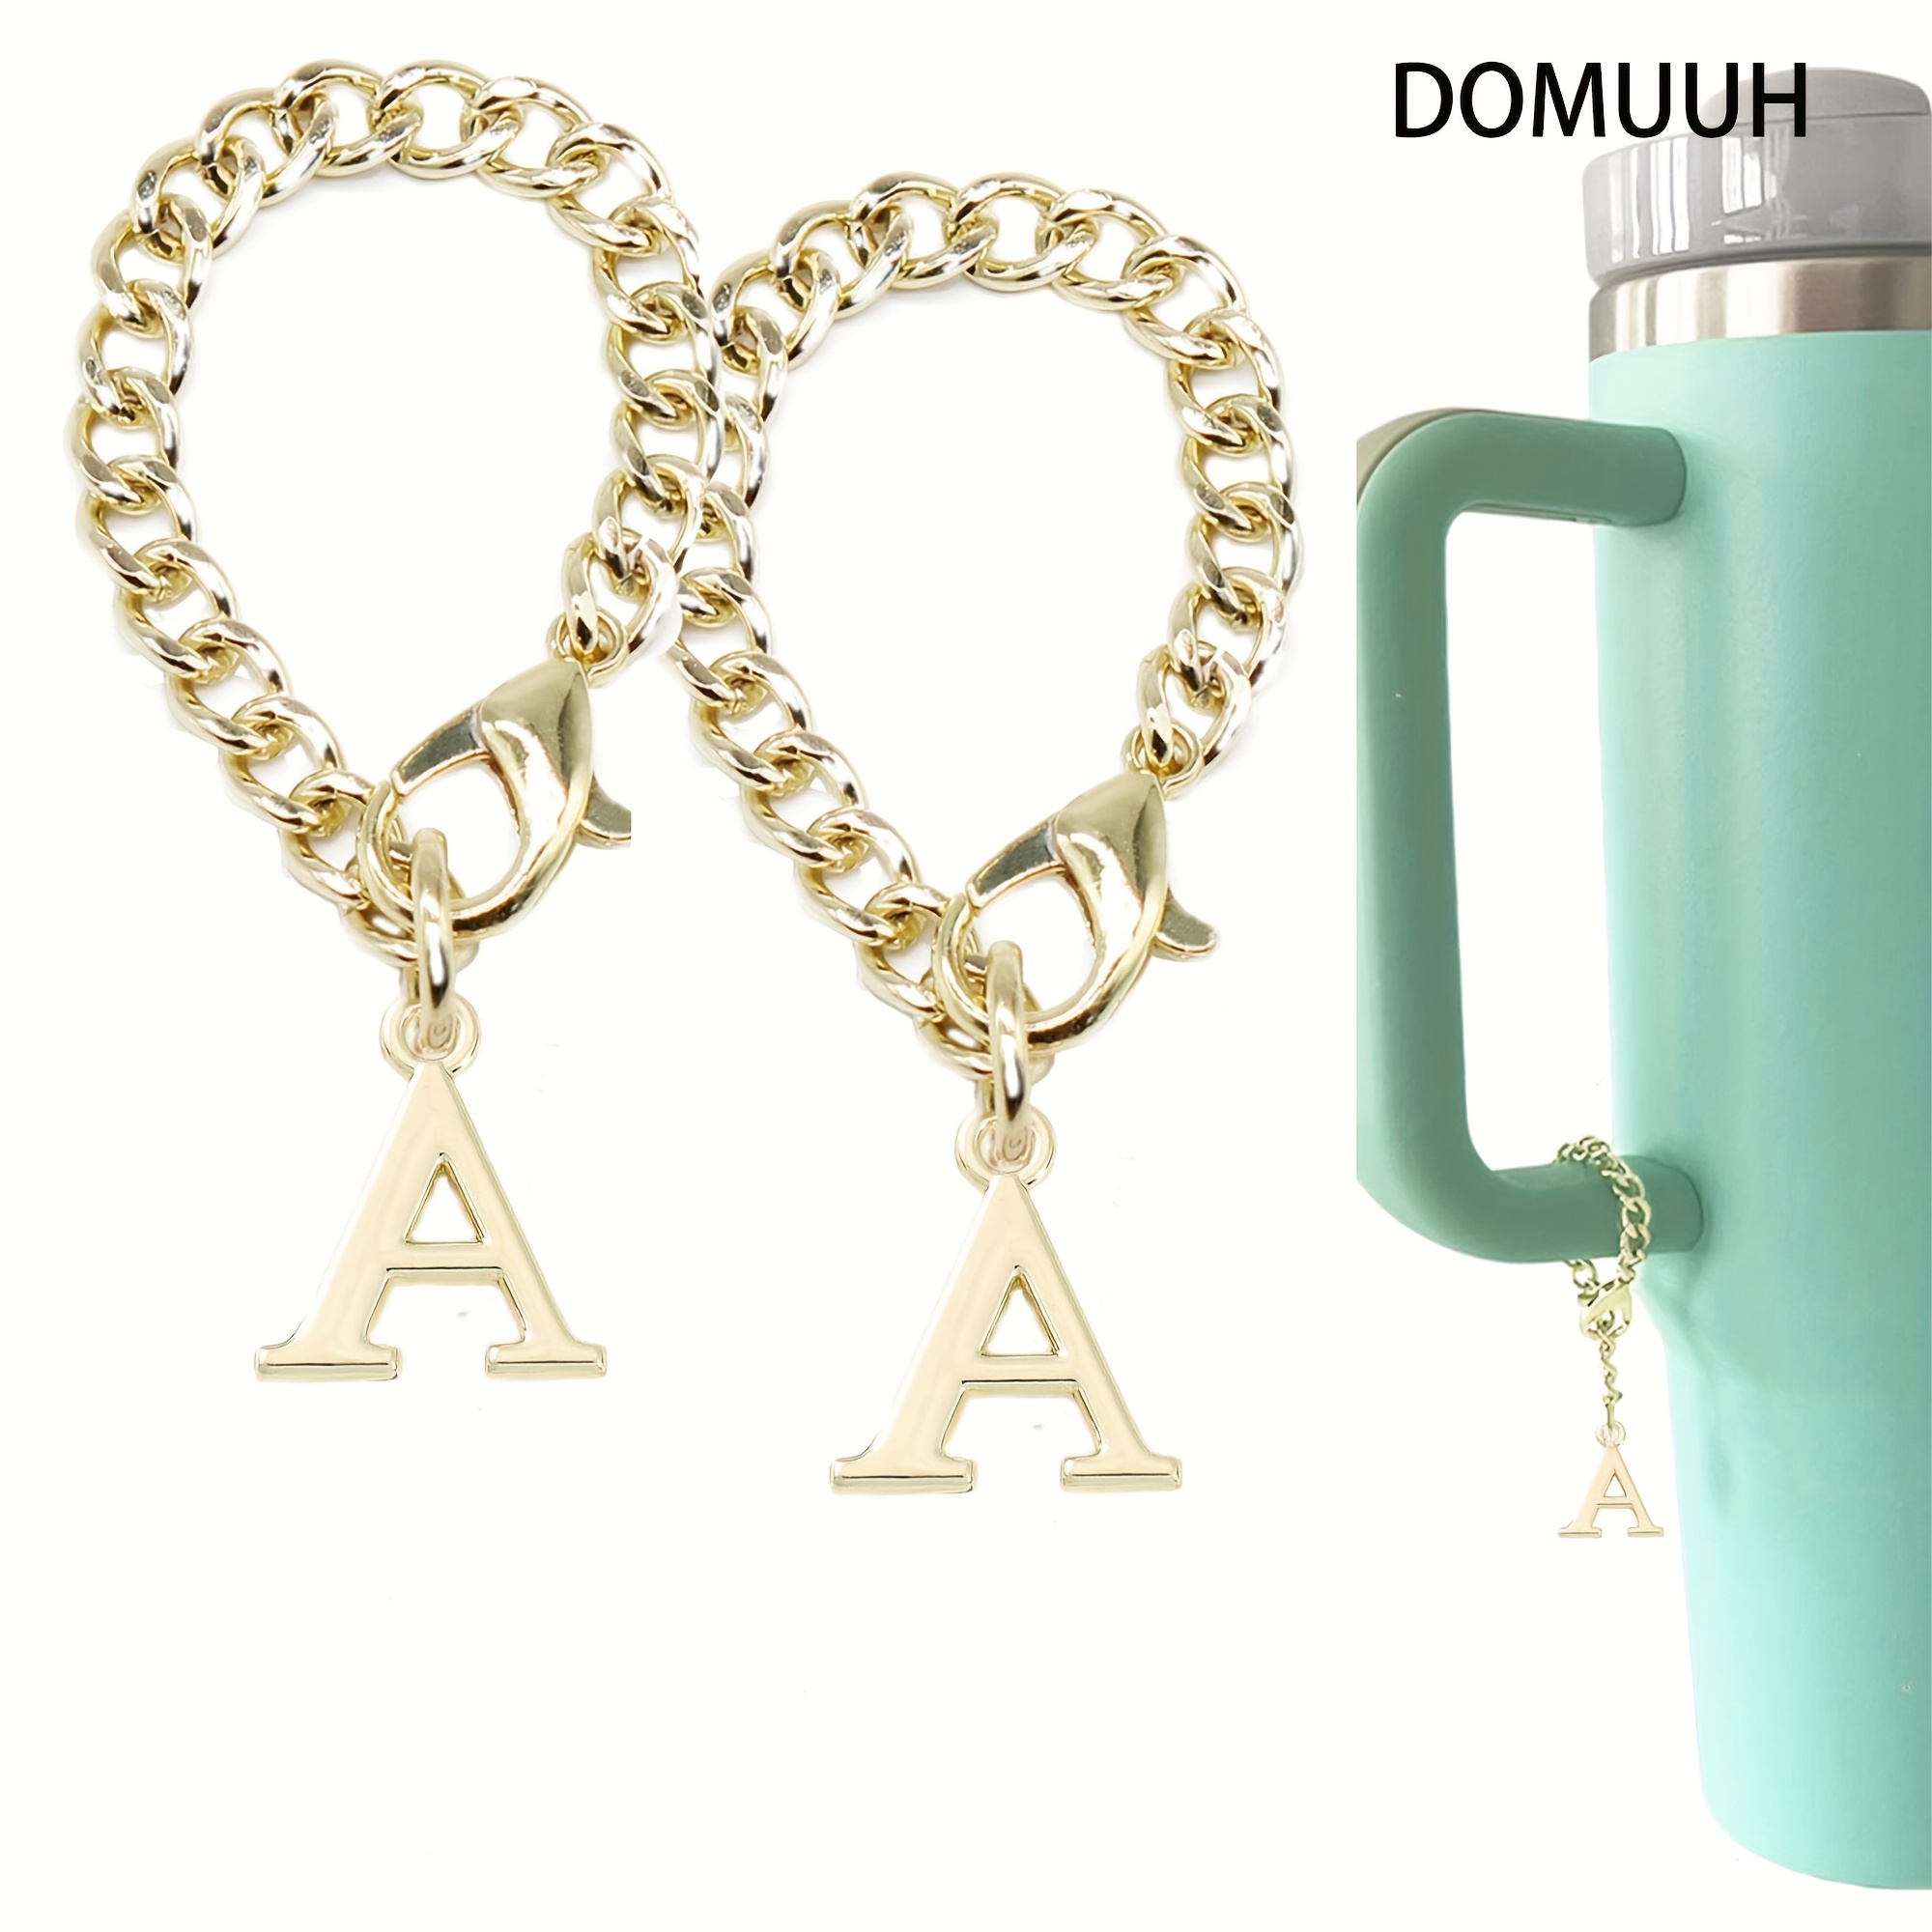 Mosey Tumbler Letter Charm Love Heart Oil-dripping A-Z Capital Letter Water  Cup Mug Handle Identification Decoration Hanging Chain Pendant Tumbler  Accessories 